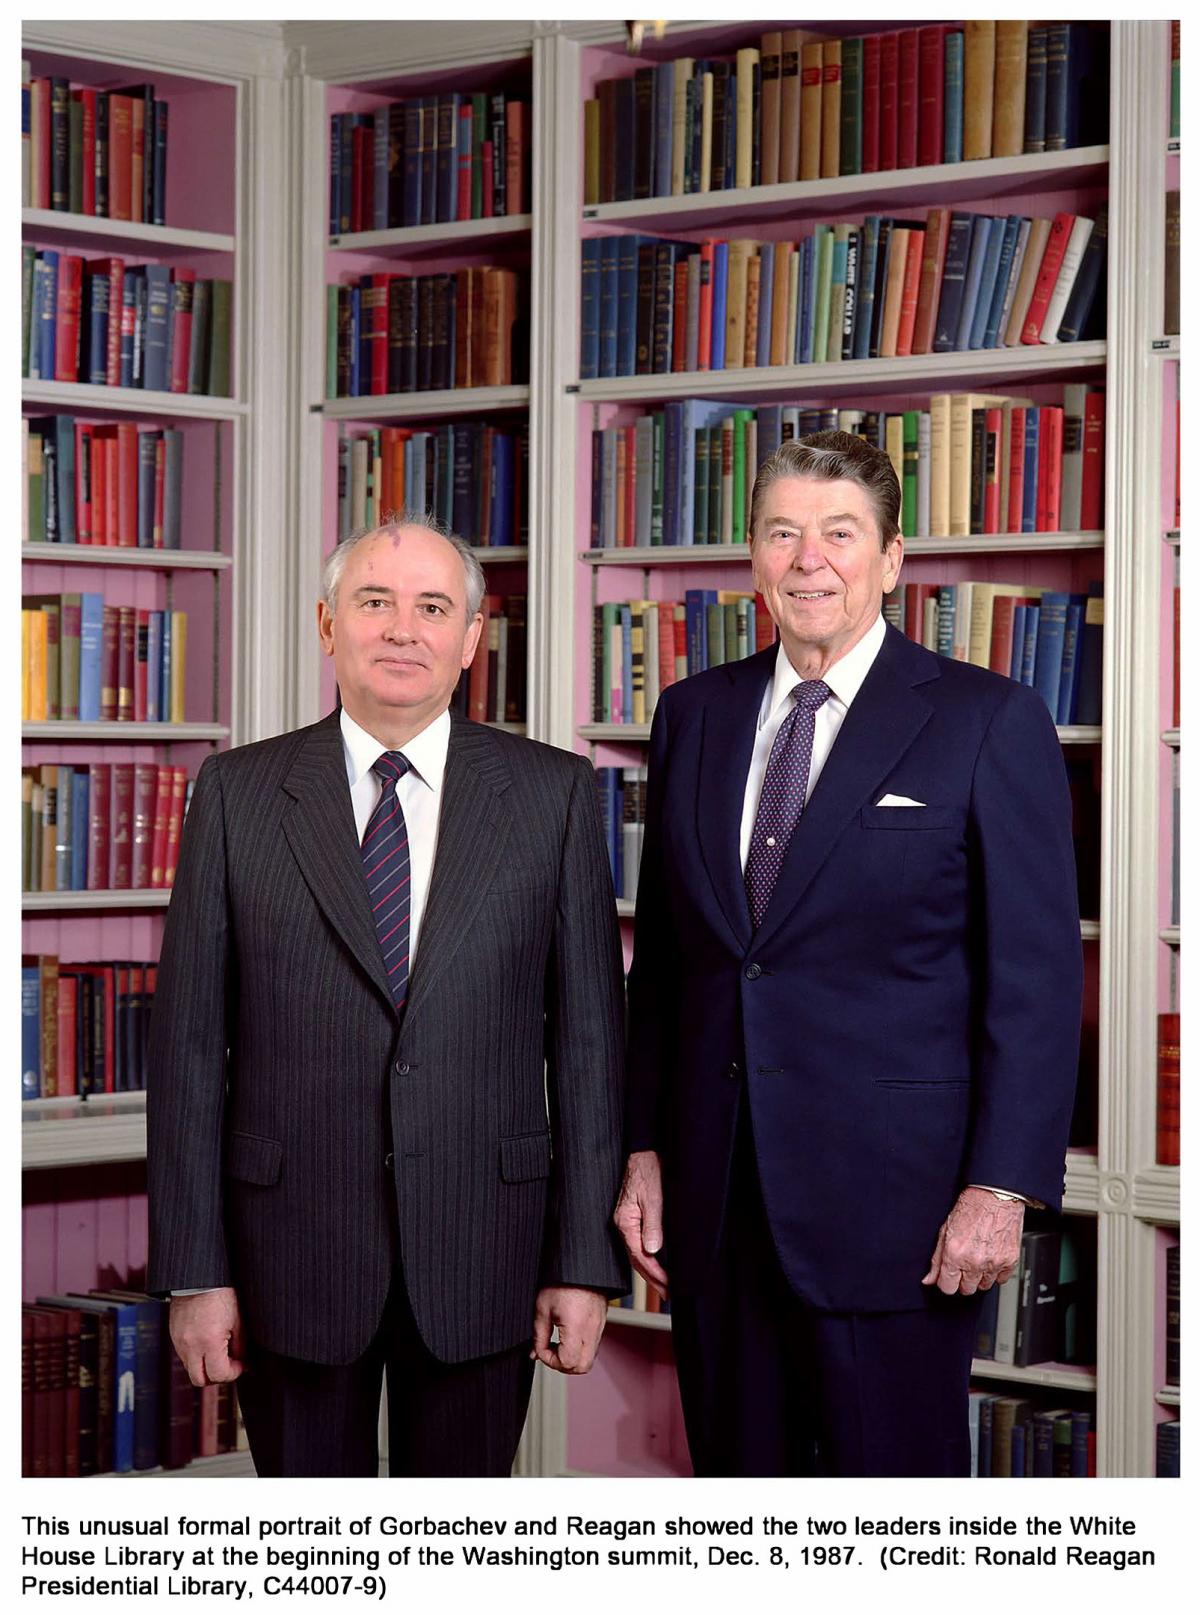 This unusual formal portrait of Gorbachev and Reagan showed the two leaders inside the White House Library at the beginning of the Washington summit, Оес. 8, 1987. 